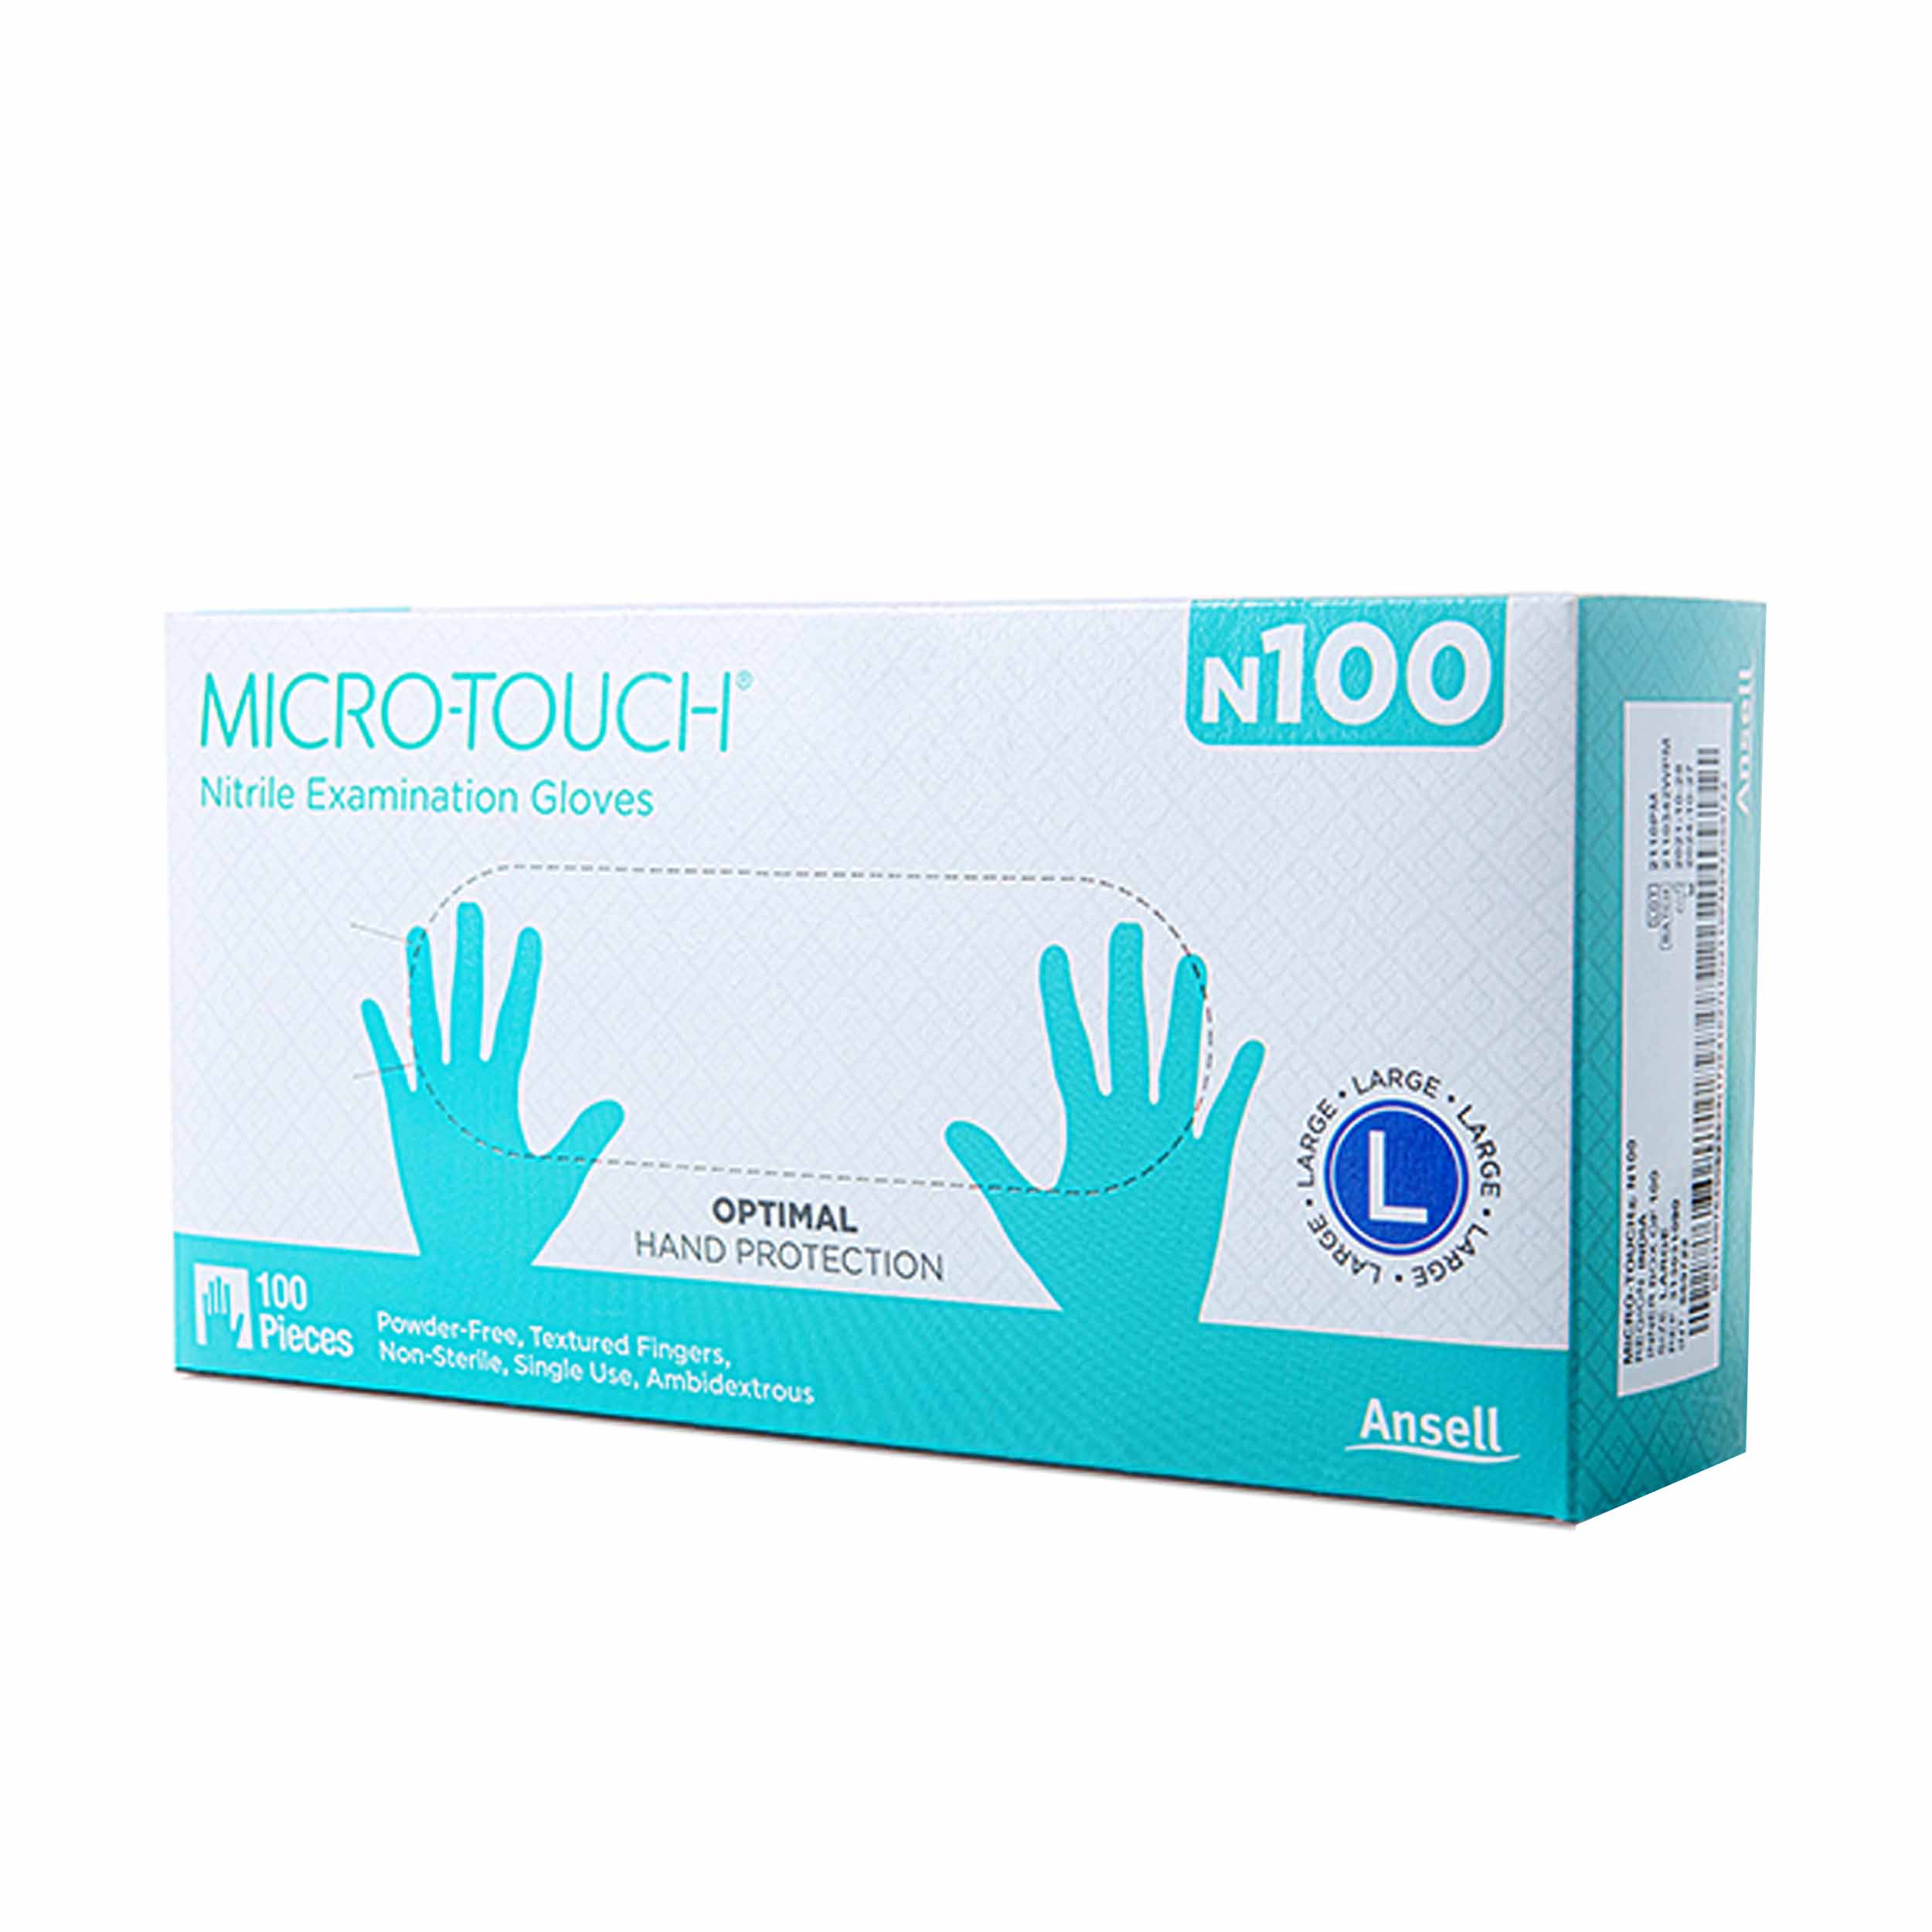 Ansell Micro Touch Nitrile Examination Gloves N100 Small